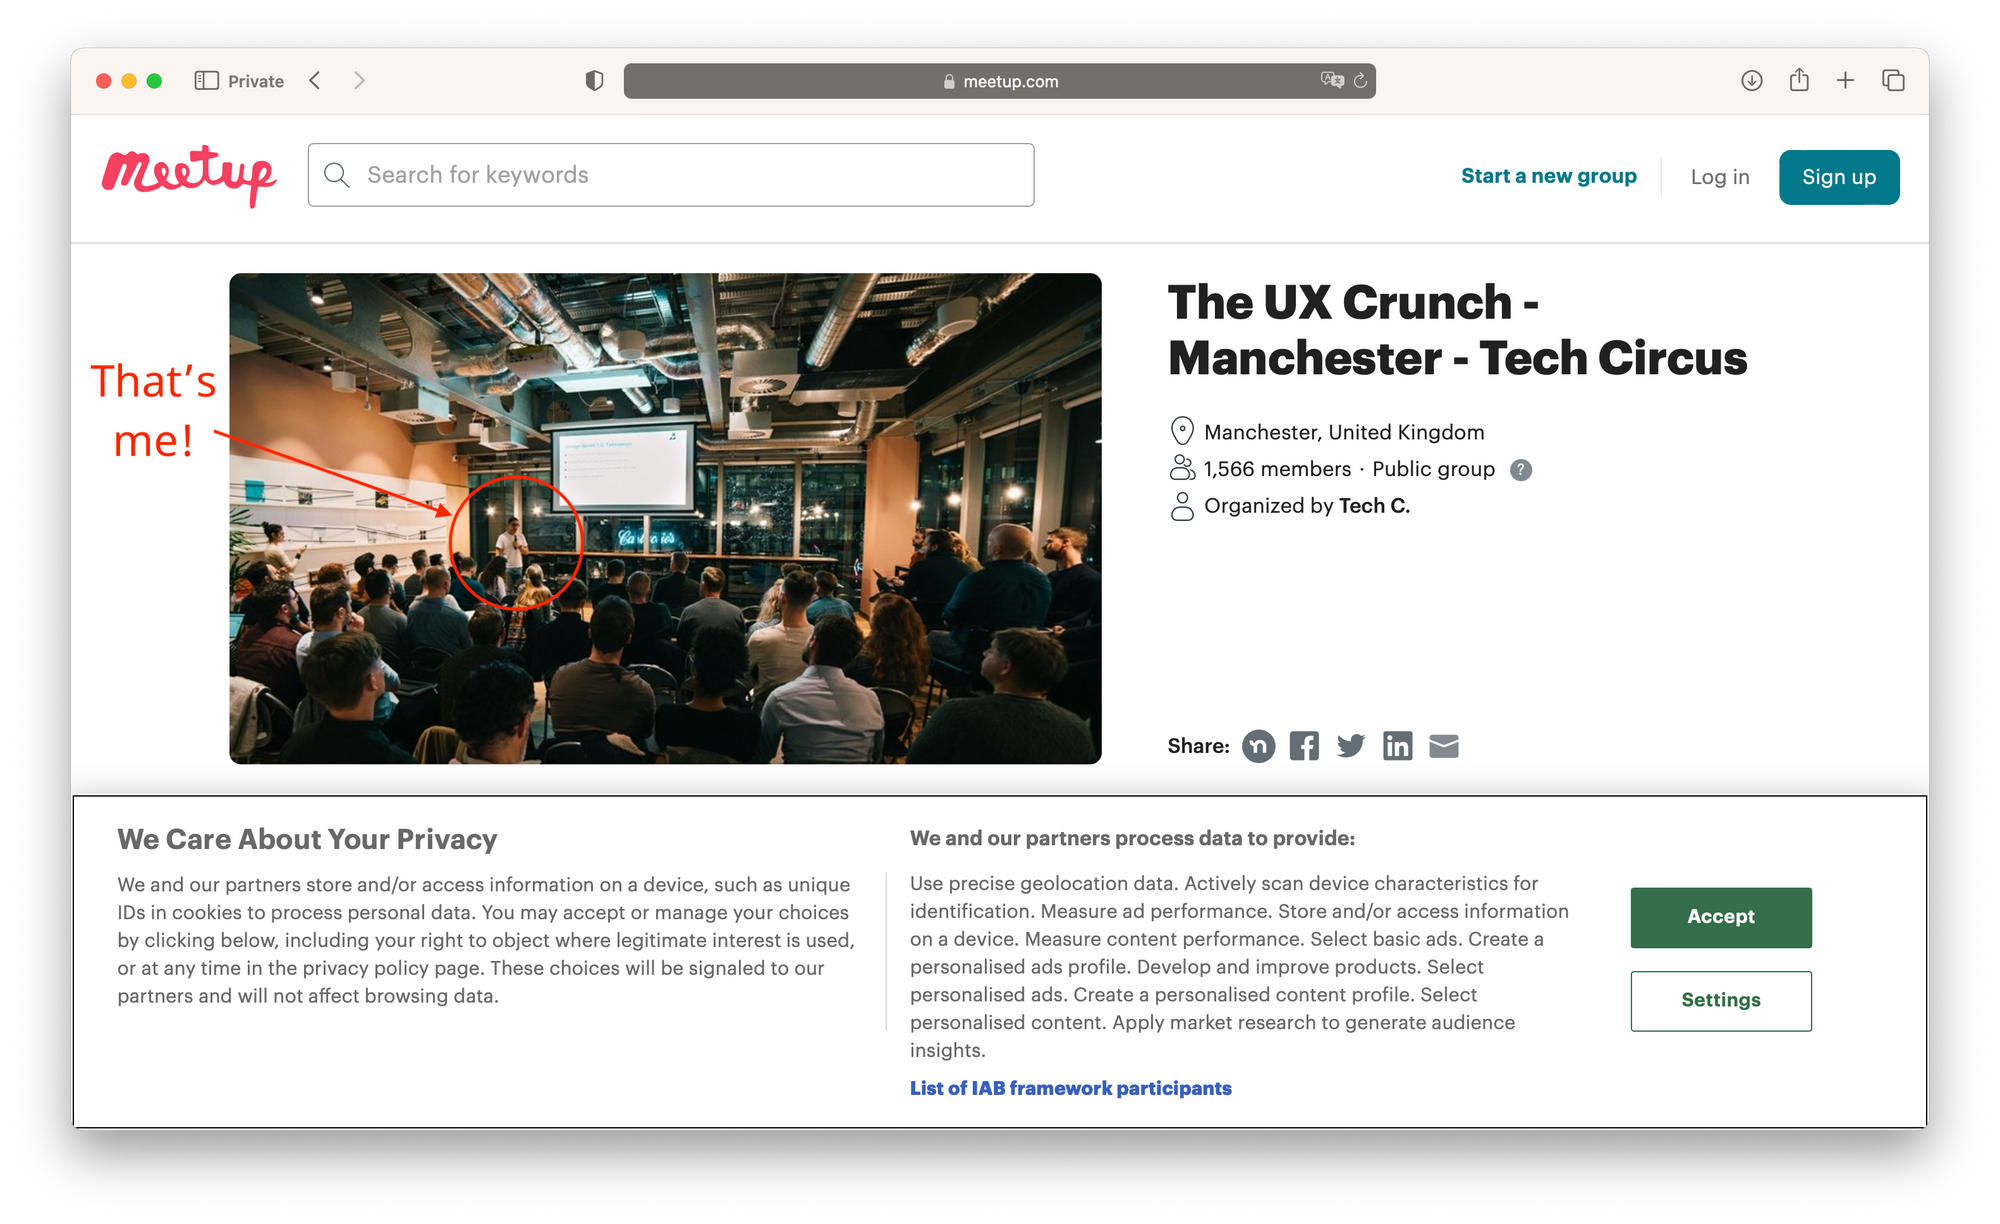 Landing page of The UX Crunch Manchester, with Chuck Rice featured speaking at a Design Sprint themed event.